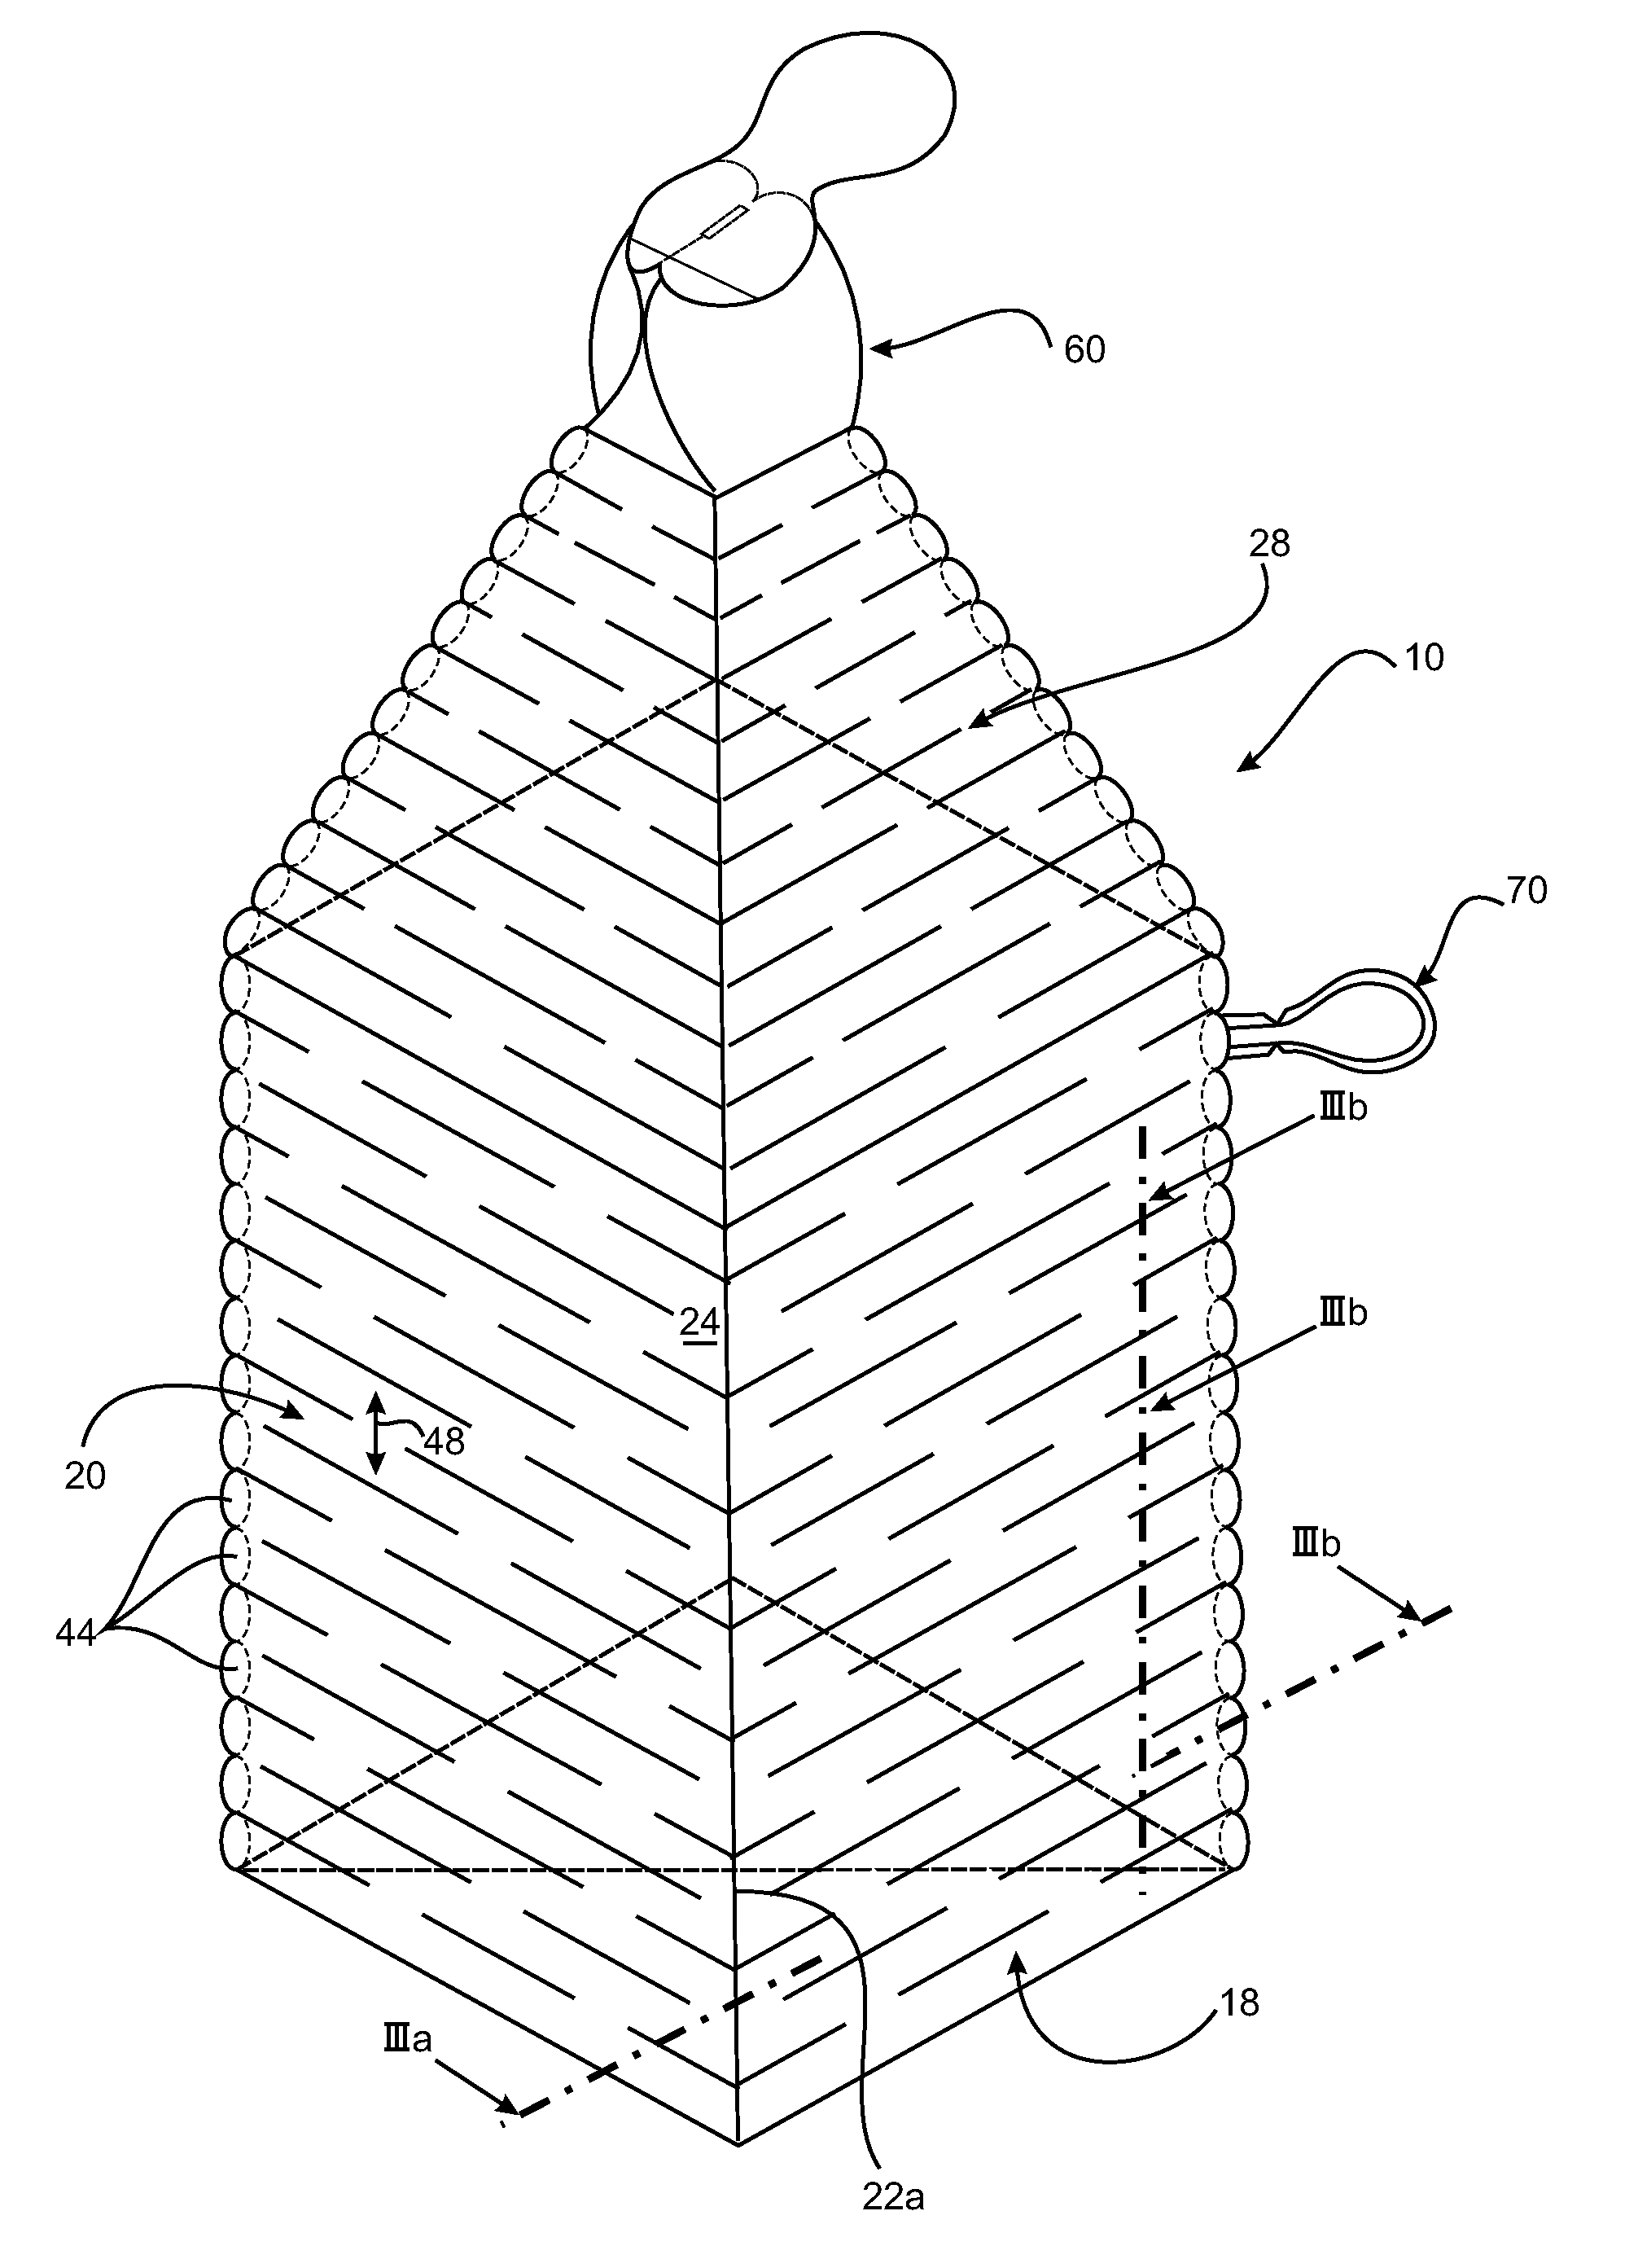 Collapsible bottle, method of manufacturing a blank for such bottle and beverage-filled bottle dispensing system